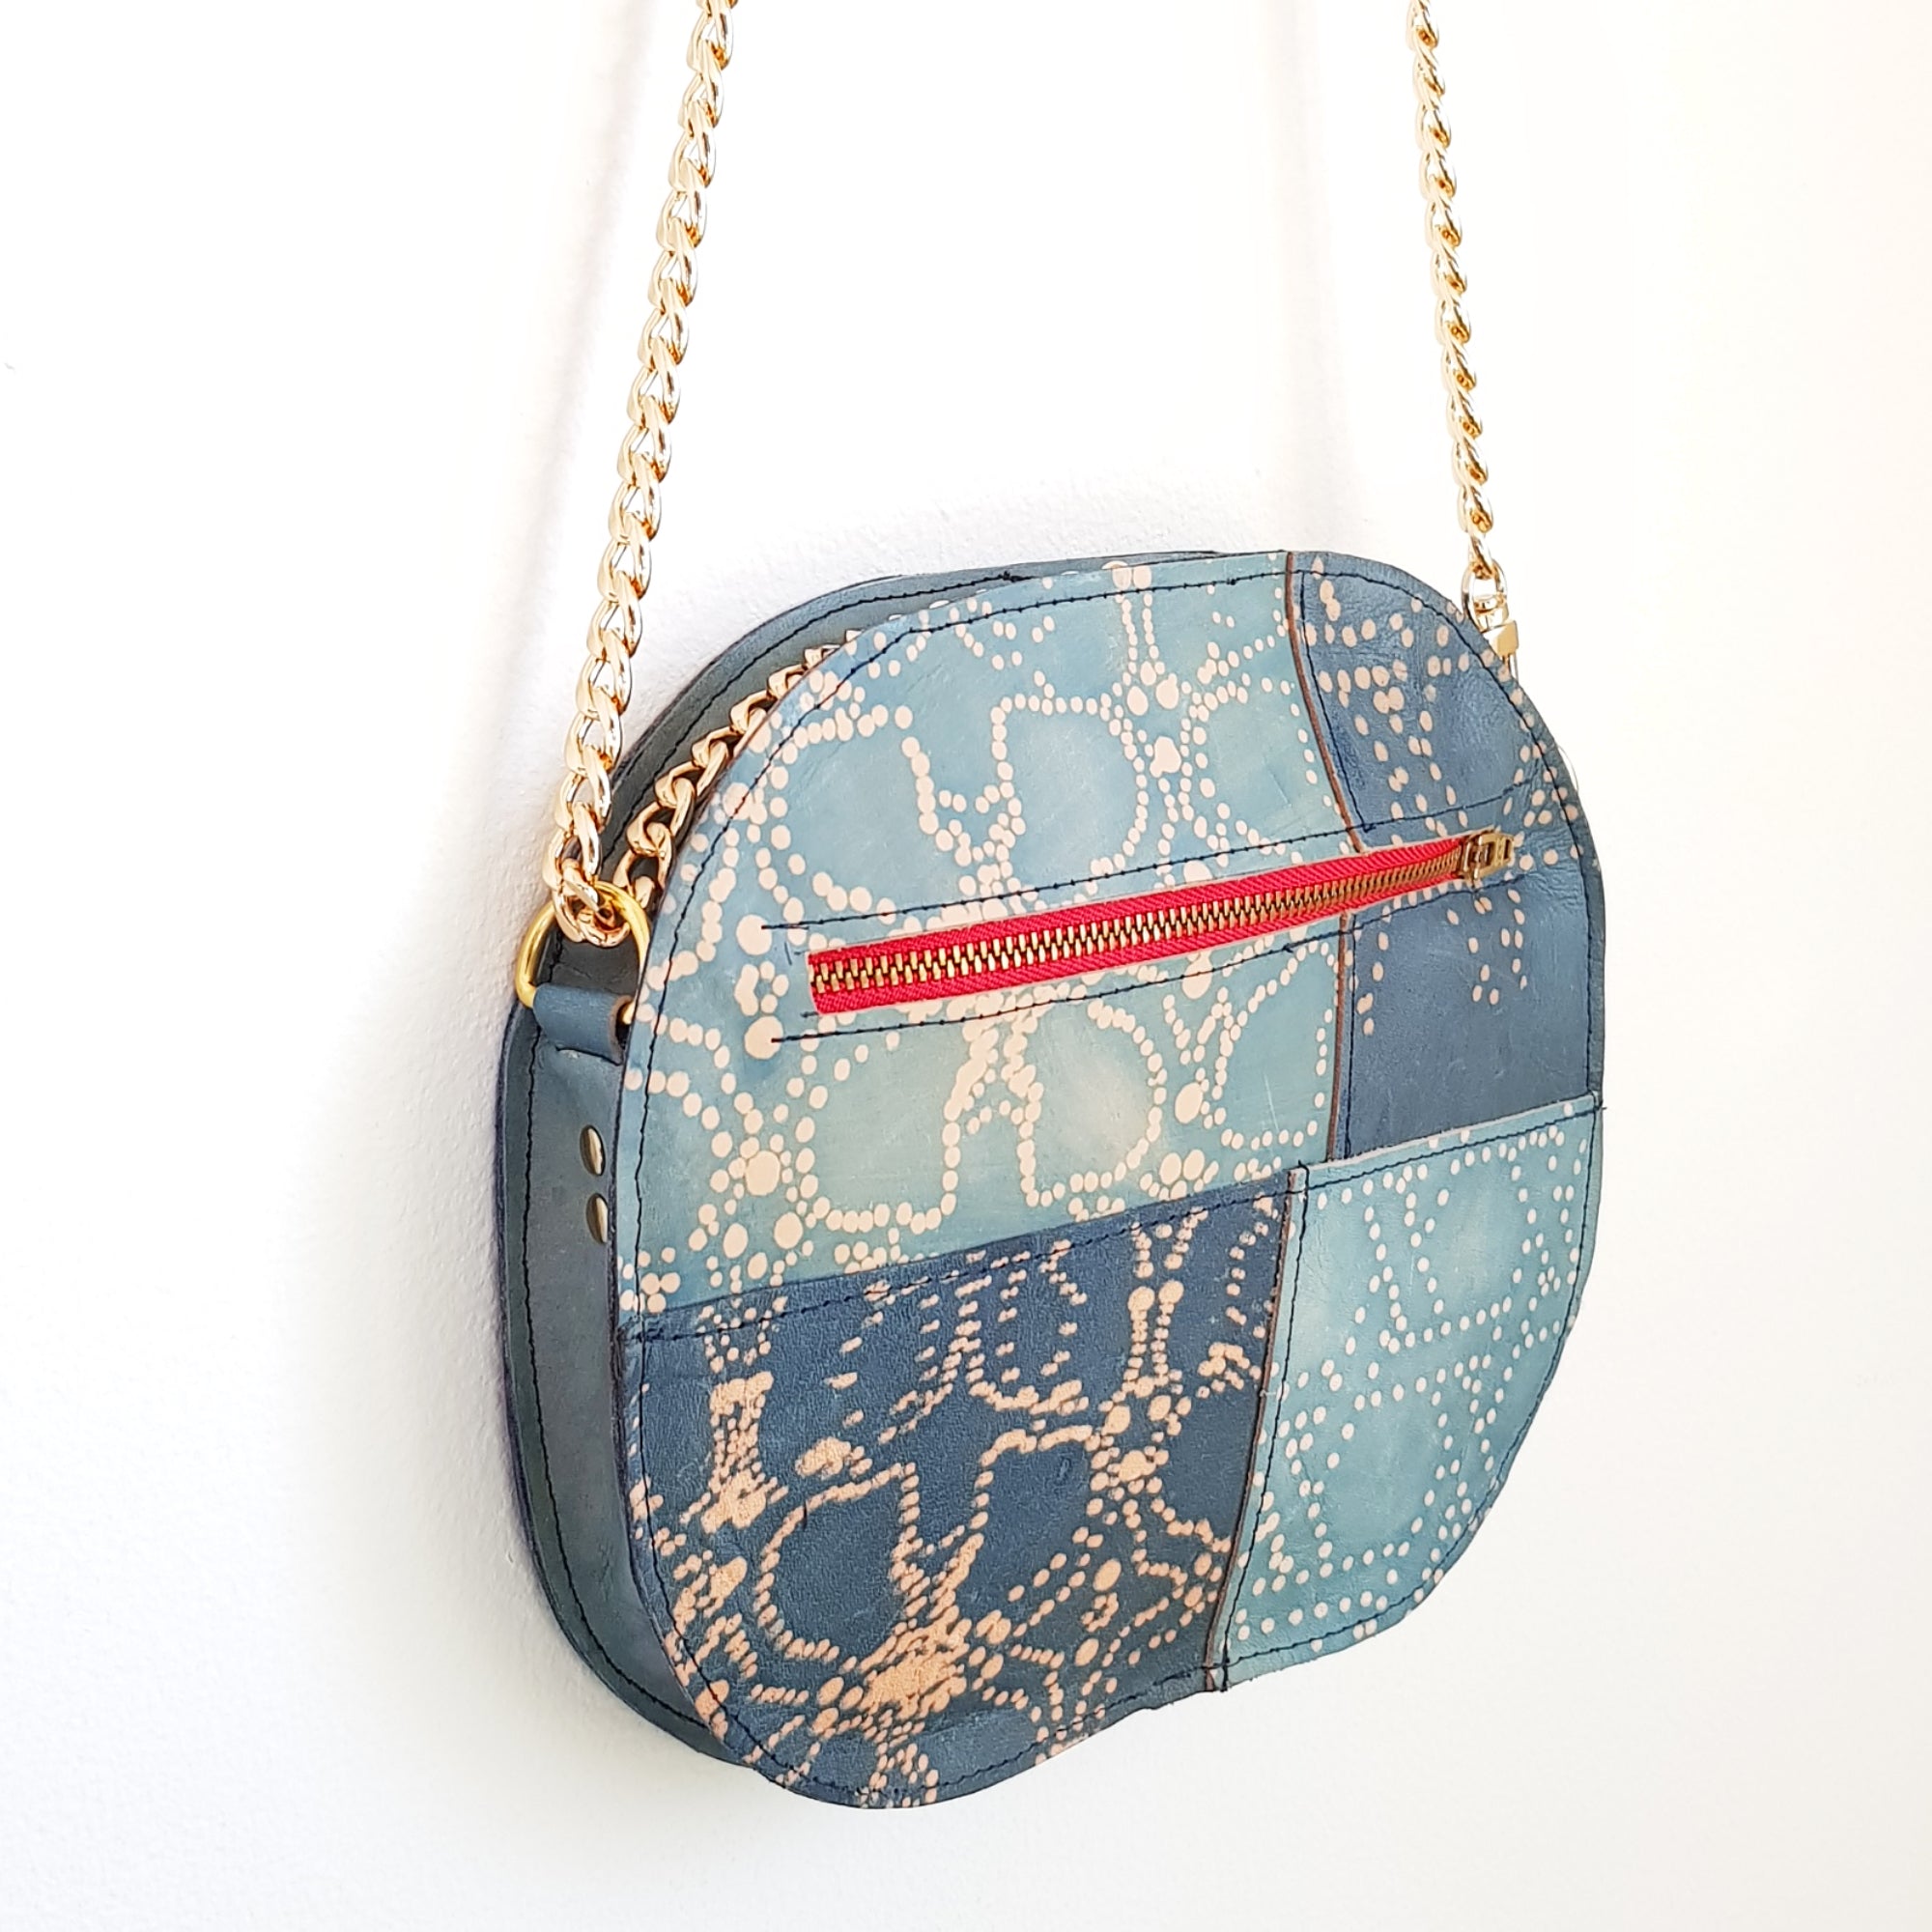 PATCH 03. Mini shoulder bag with adjustable chain strap